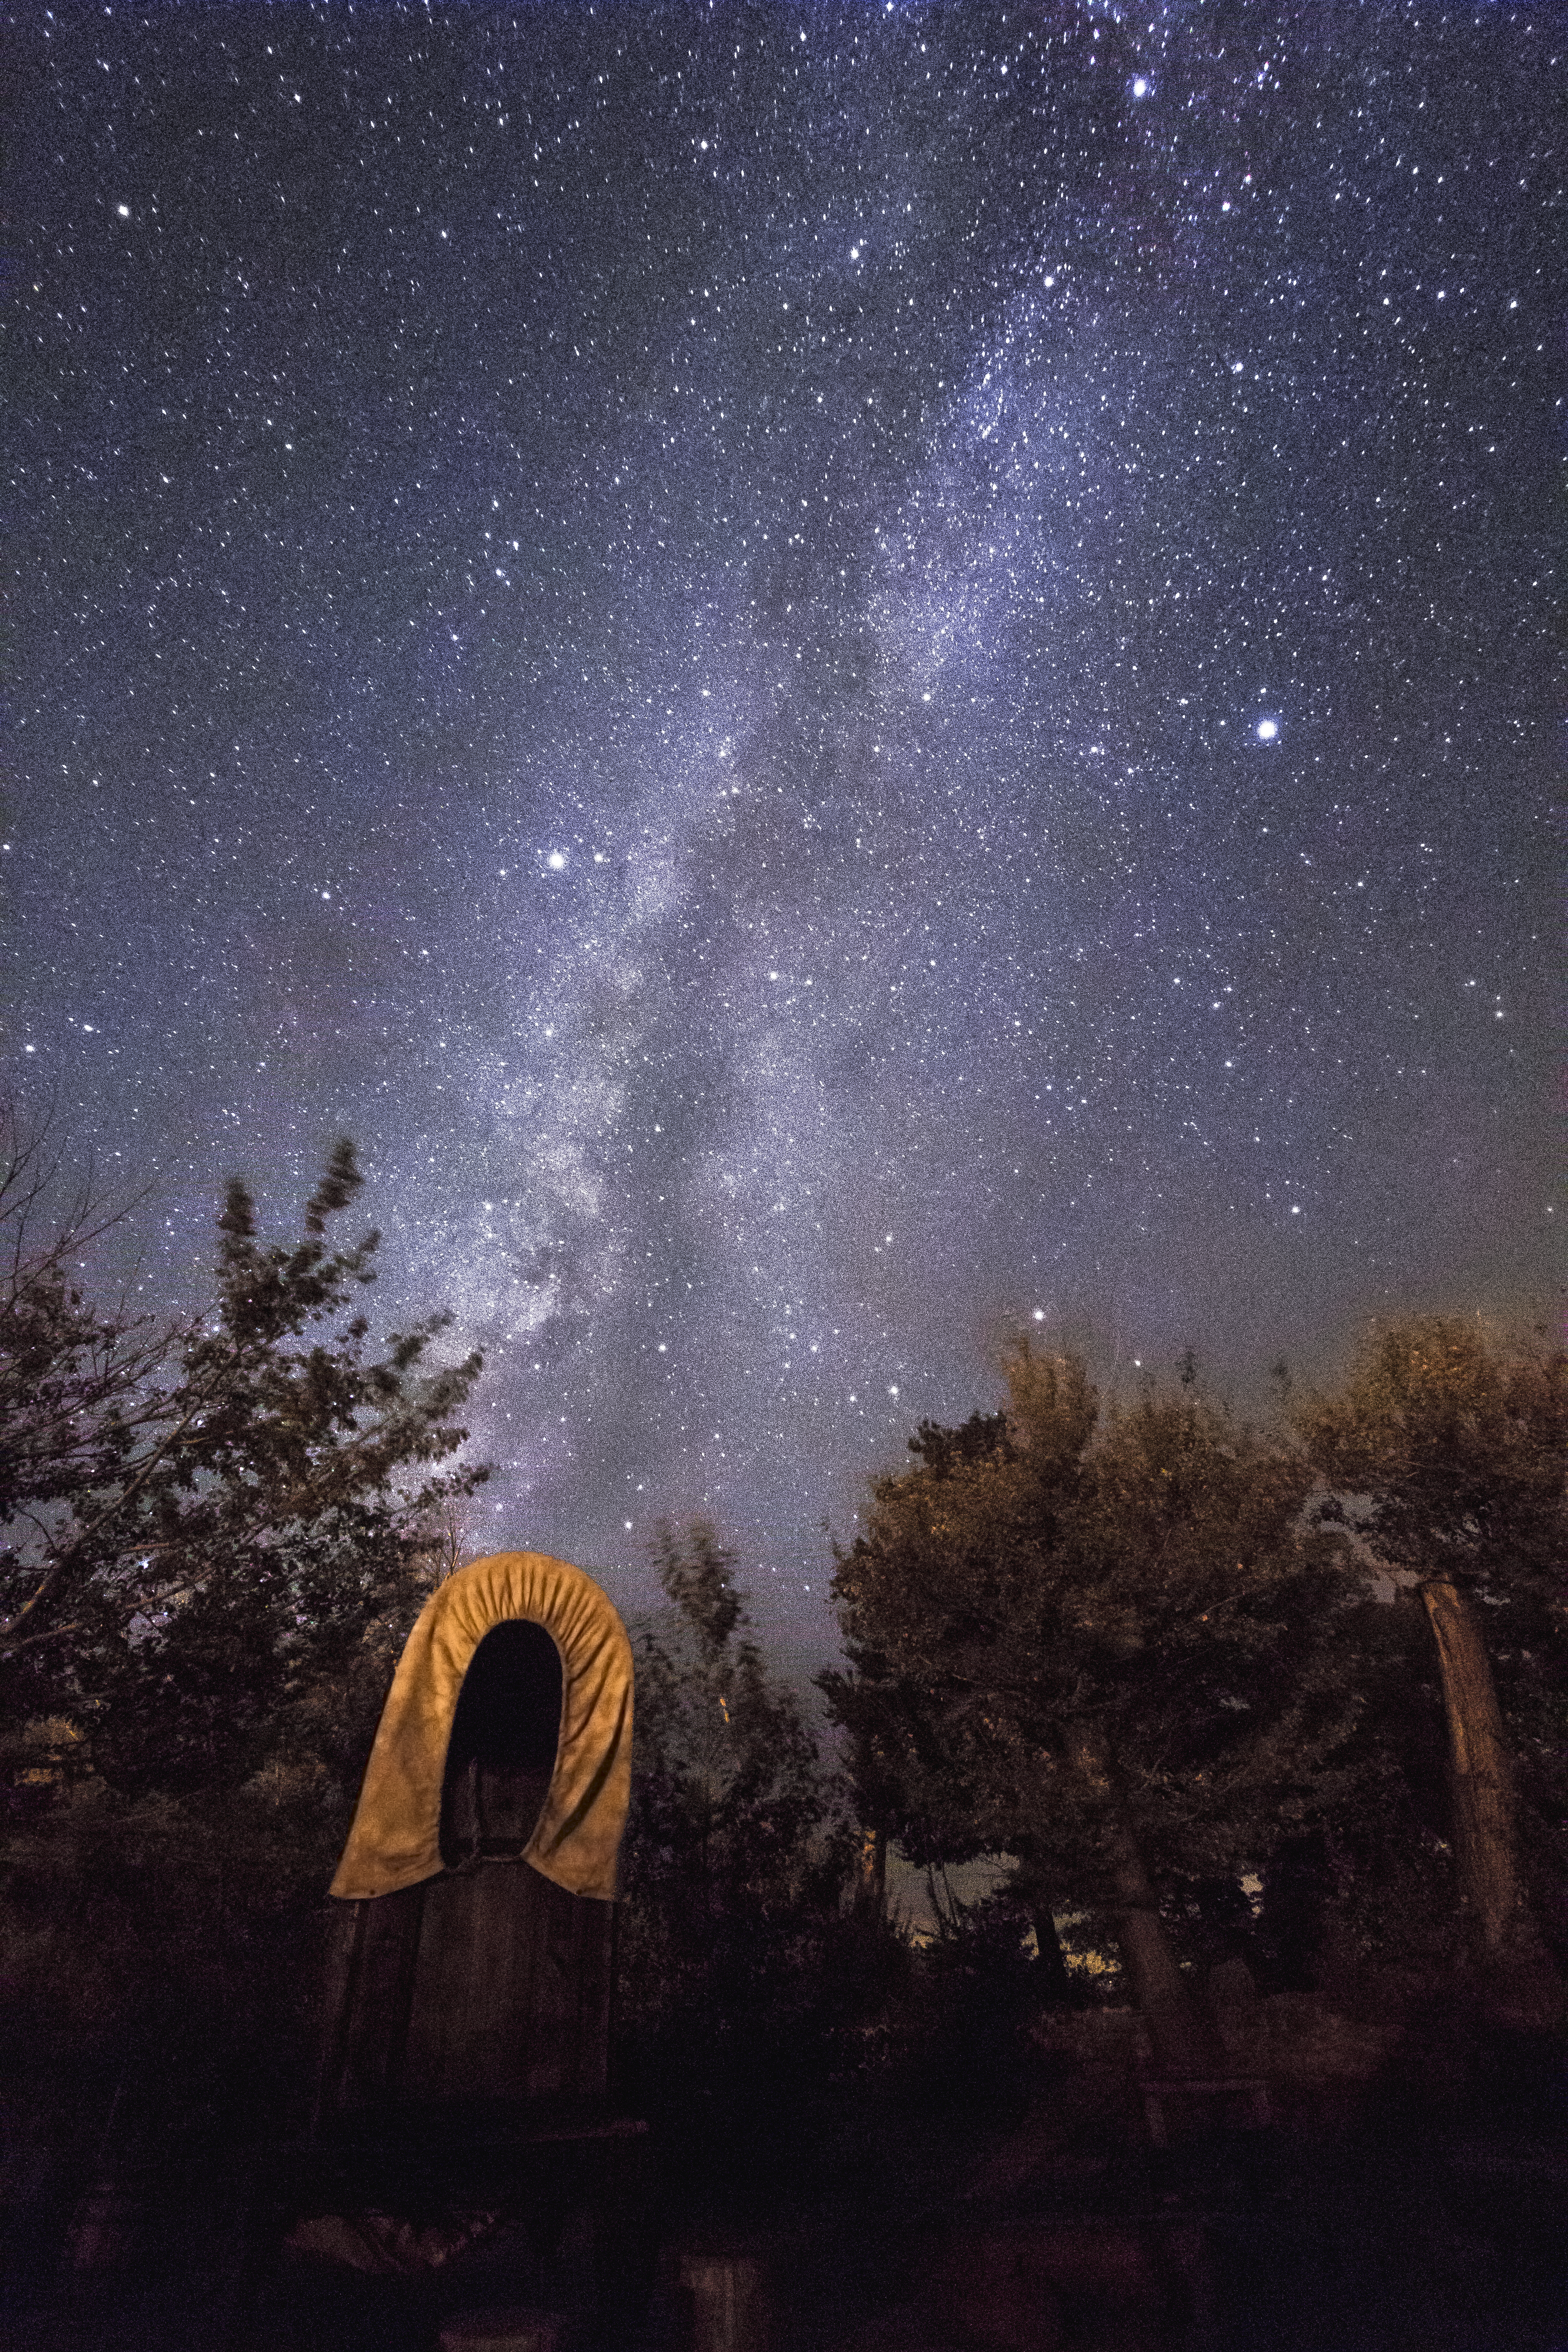 A glittering sky of stars glows above a historic covered wagon.